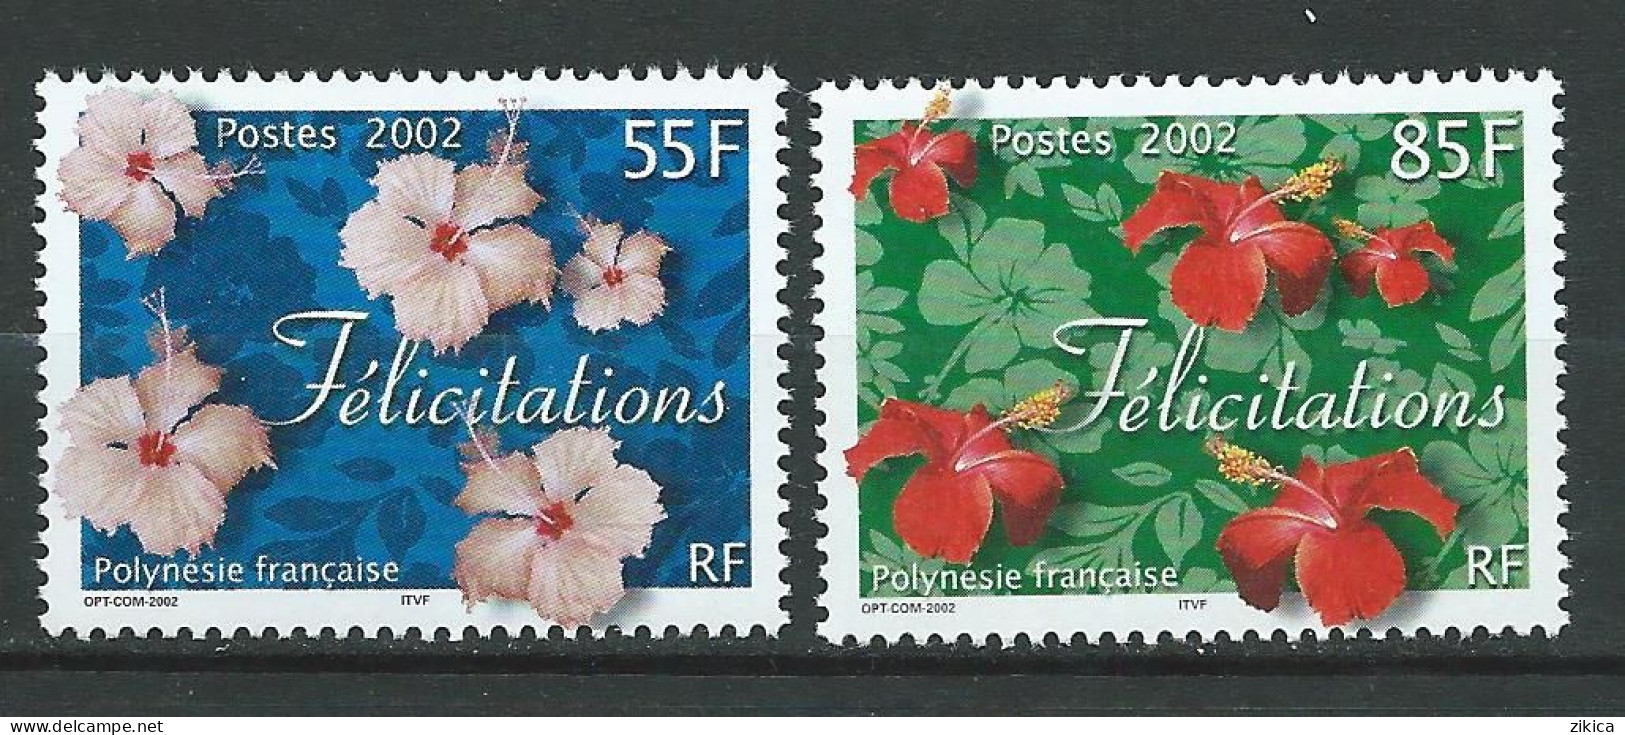 French Polynesia / Polynésie Française 2002 Greetings Stamps. MNH** - Covers & Documents